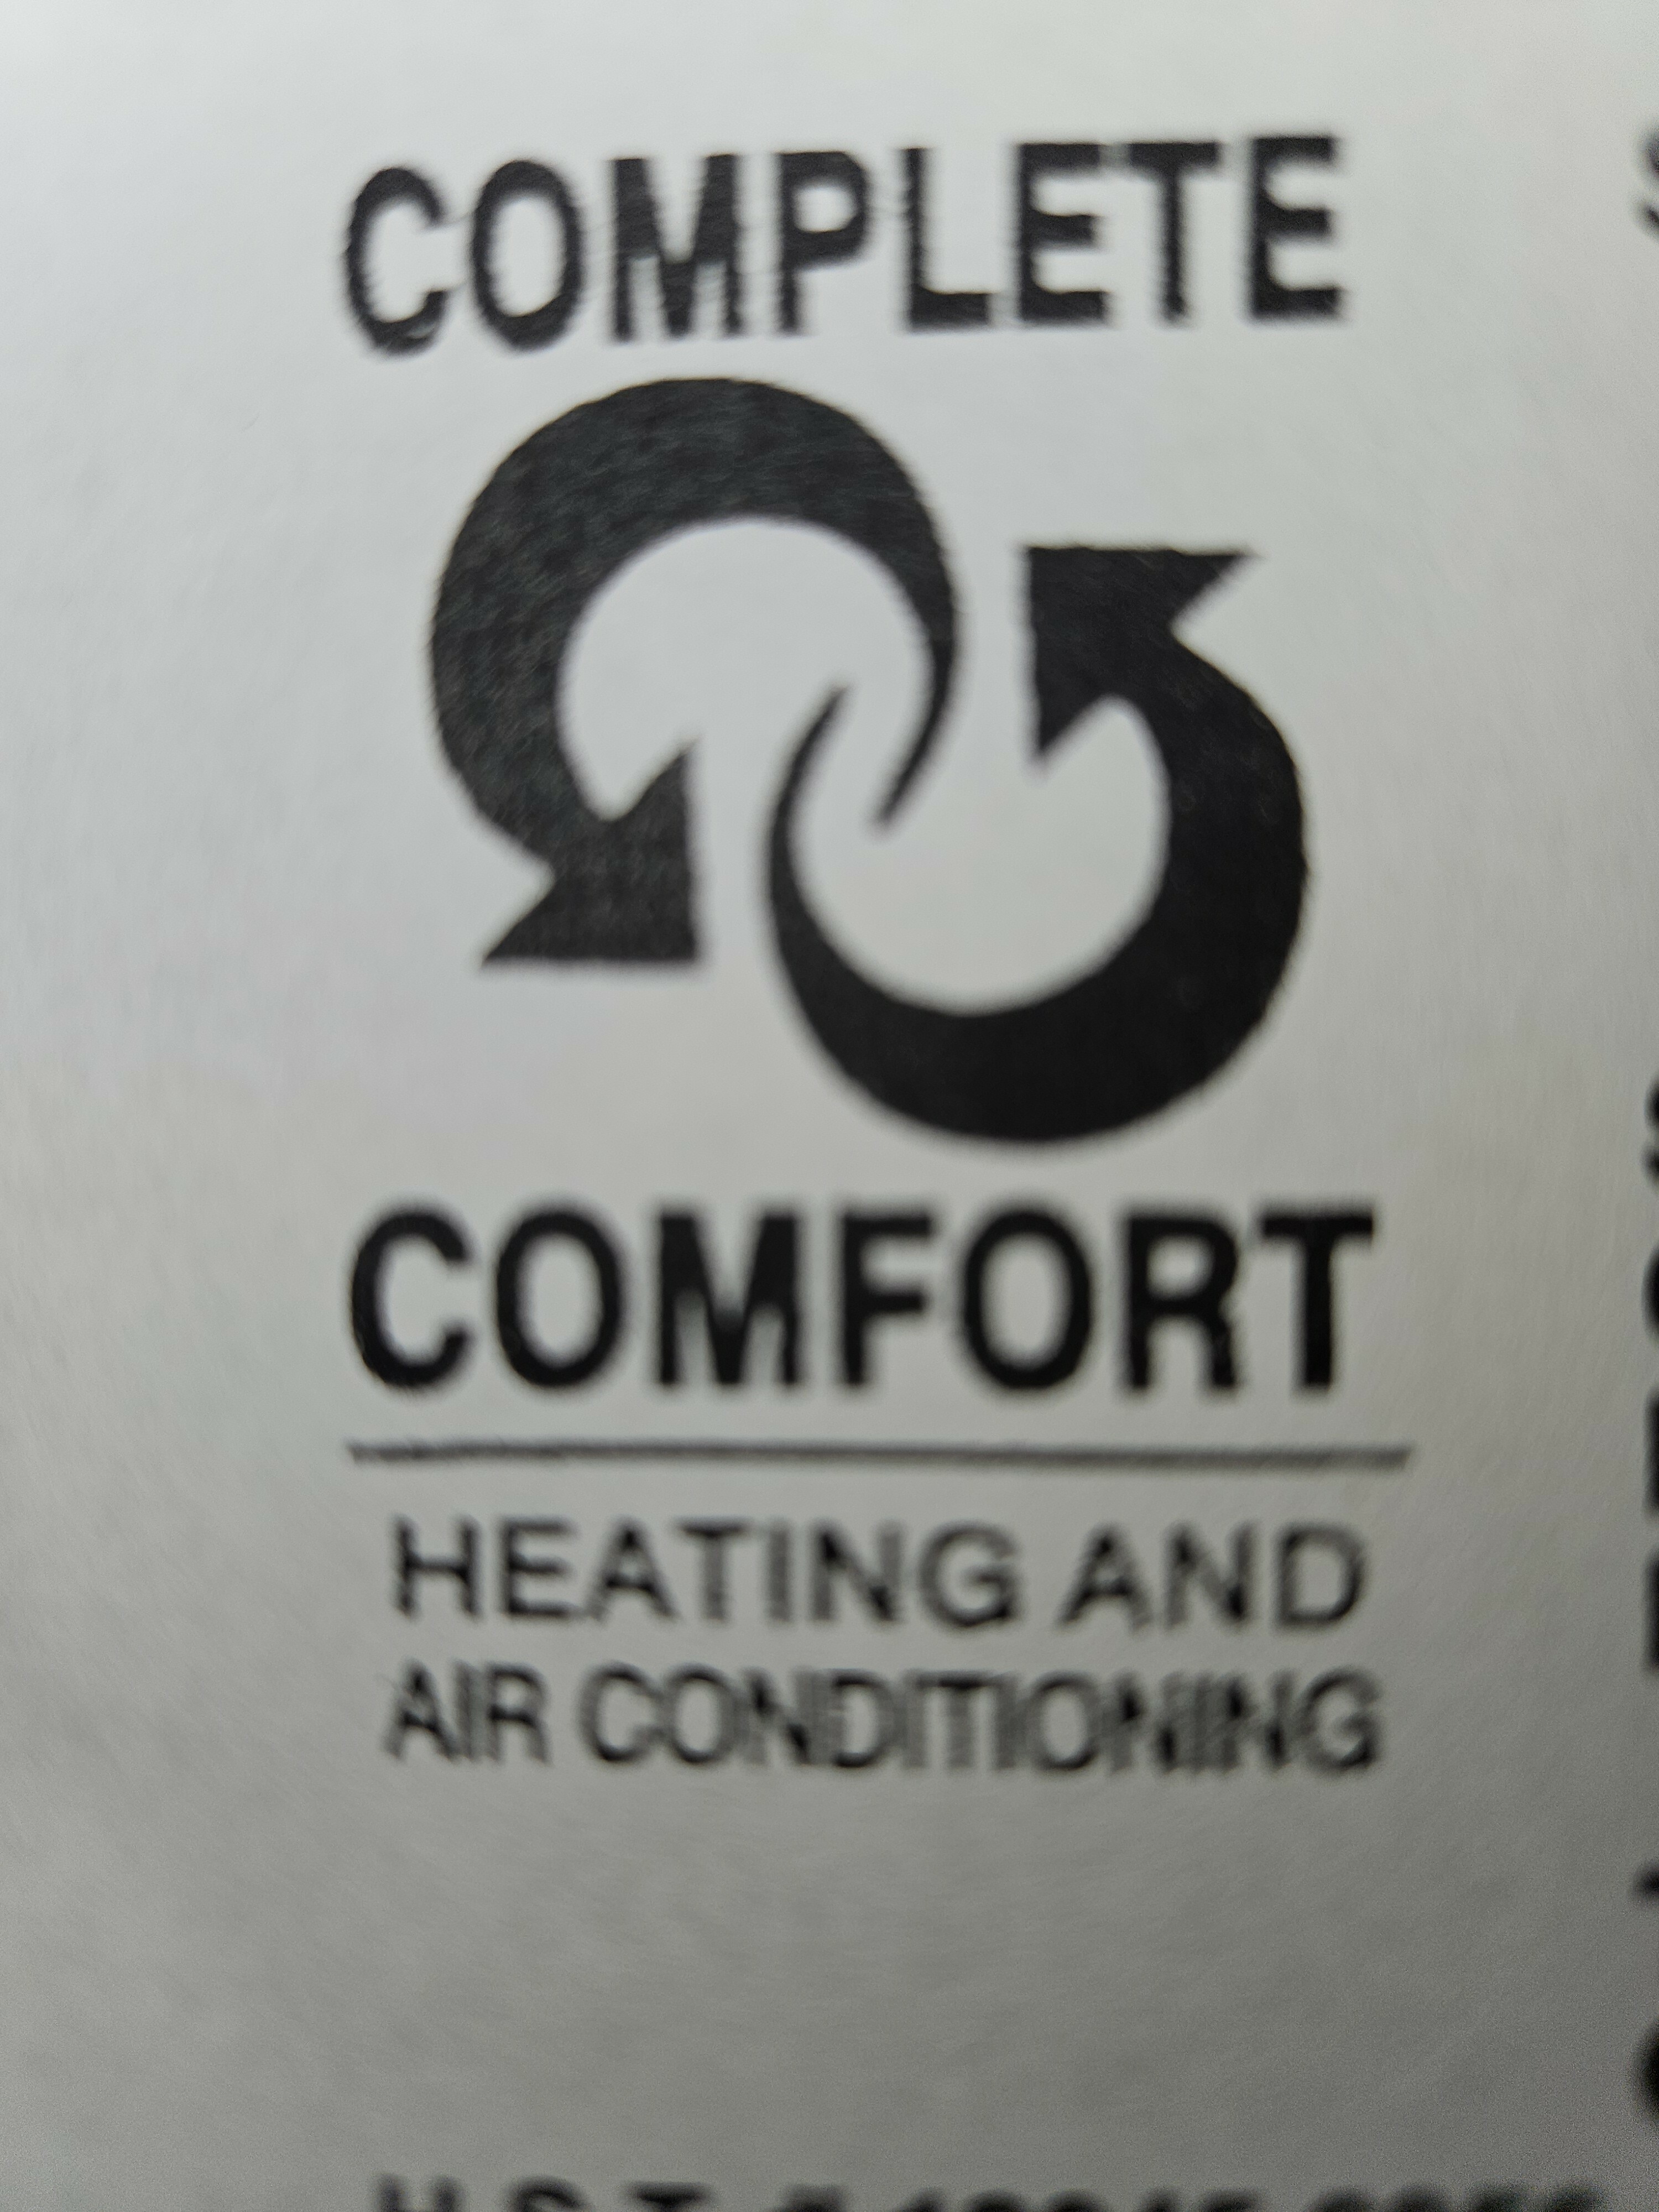 Complete Comfort Heating And Air Conditioning 's logo